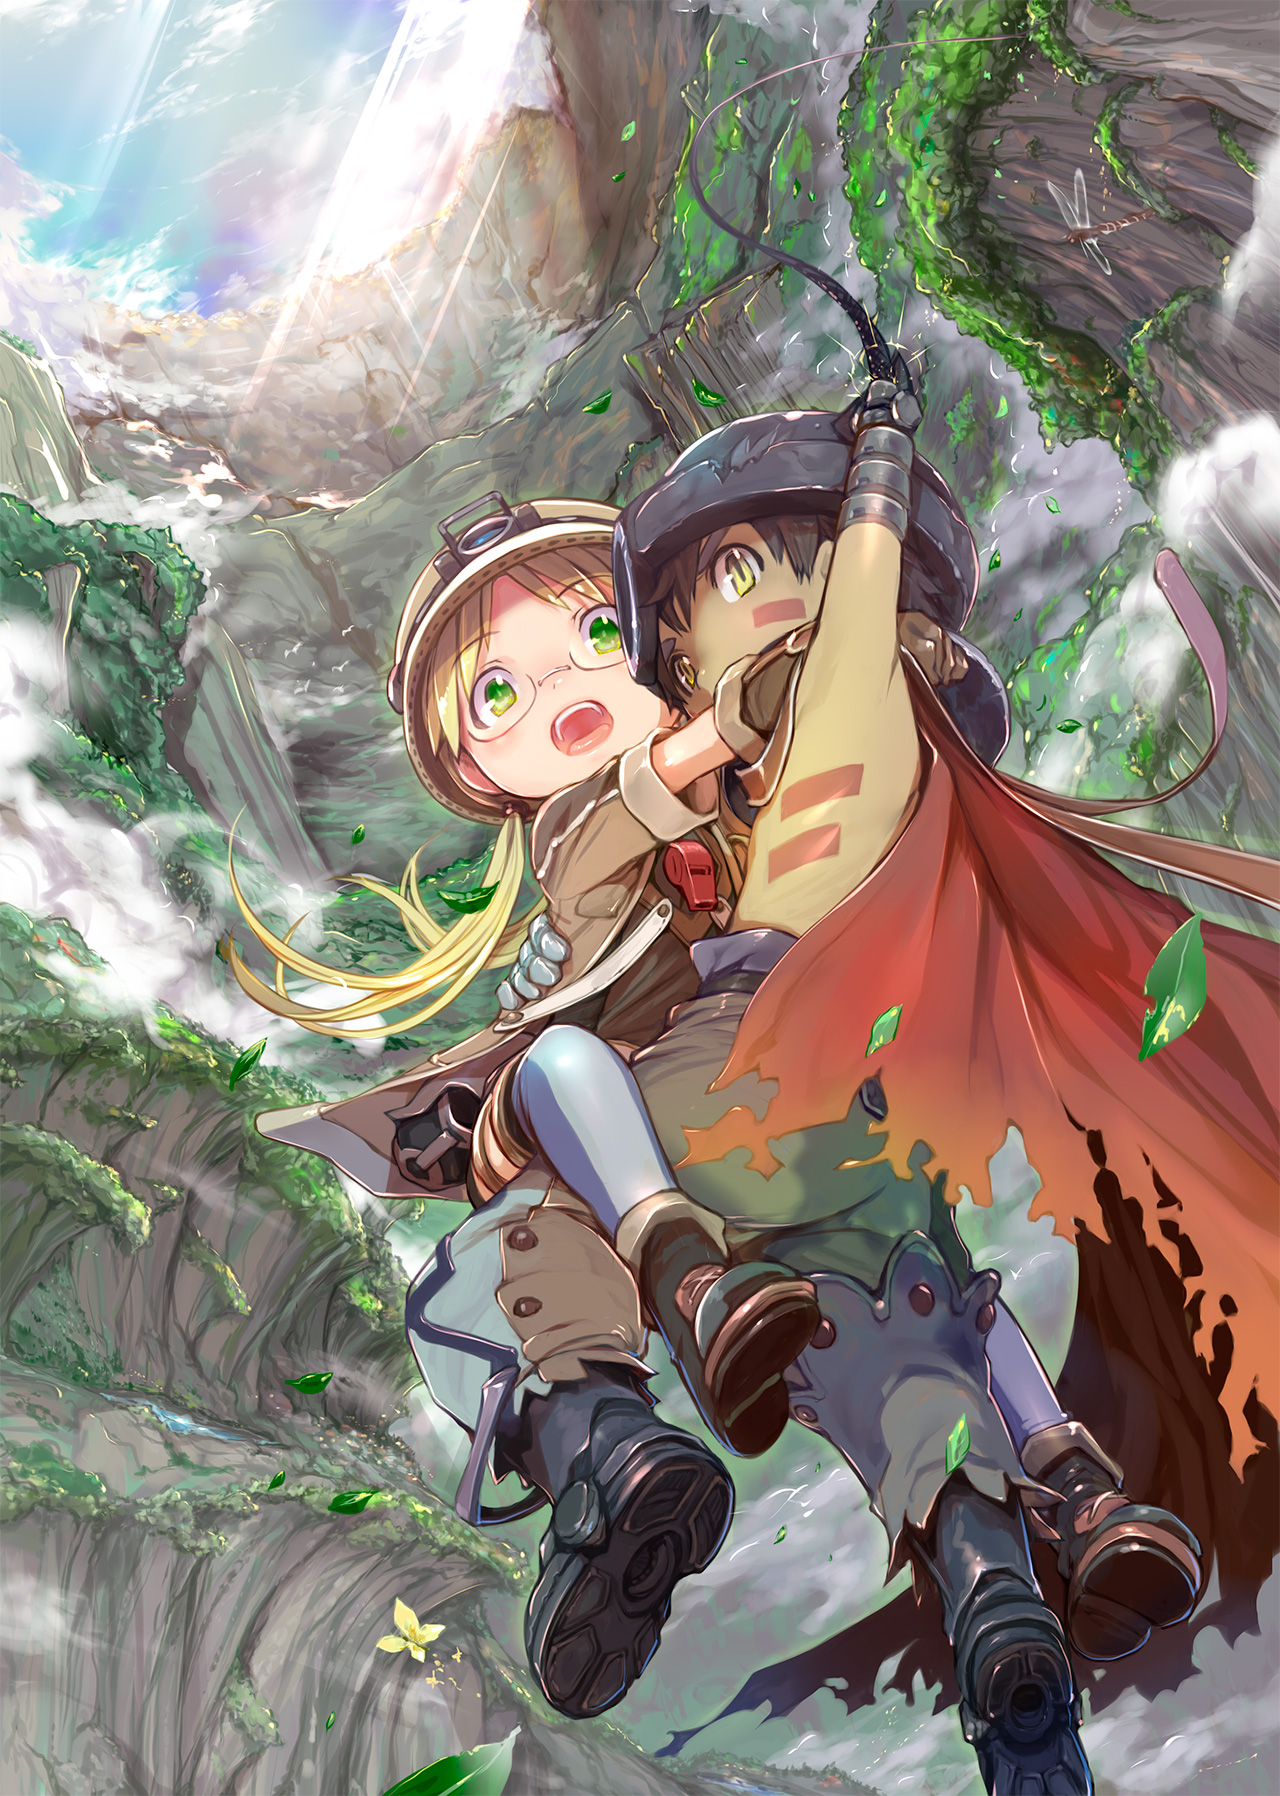 Riko (Made in Abyss) - Featured 